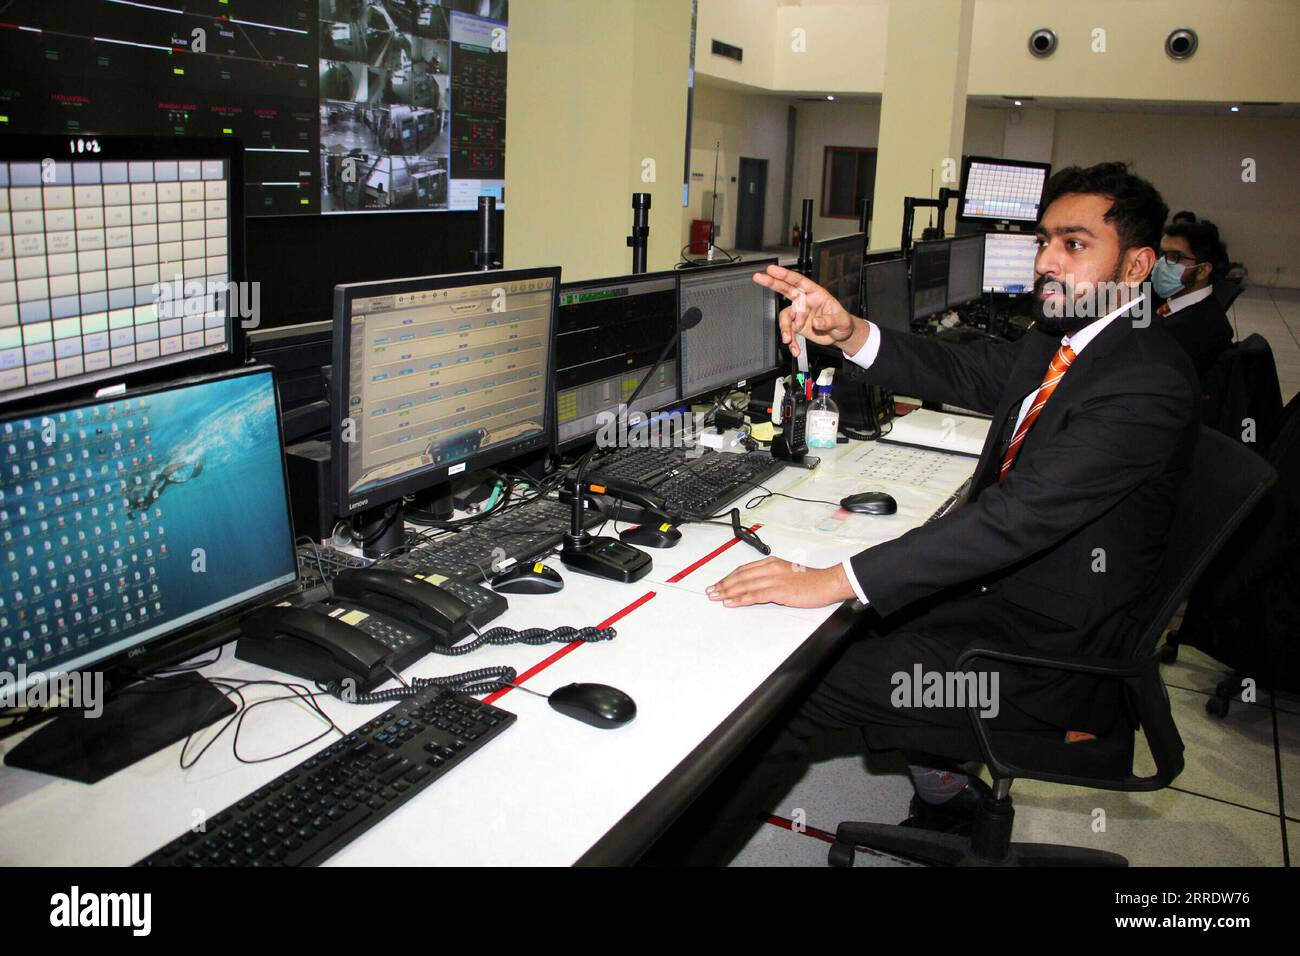 220109 -- LAHORE, Jan. 9, 2022 -- Mohammad Nauman works at the control room of the terminal station of the Orange Line in Lahore, Pakistan, Dec. 29, 2021. Officially open to traffic on Oct. 25, 2020, the eco-friendly Orange Line metro train is an early project under the China-Pakistan Economic Corridor CPEC, a flagship project of the China-proposed Belt and Road Initiative. TO GO WITH Feature: Lahore Orange Line, epitome of China-Pakistan friendship Photo by /Xinhua PAKISTAN-LAHORE-B&R-CPEC-ORANGE LINE METRO TRAIN JamilxAhmed PUBLICATIONxNOTxINxCHN Stock Photo